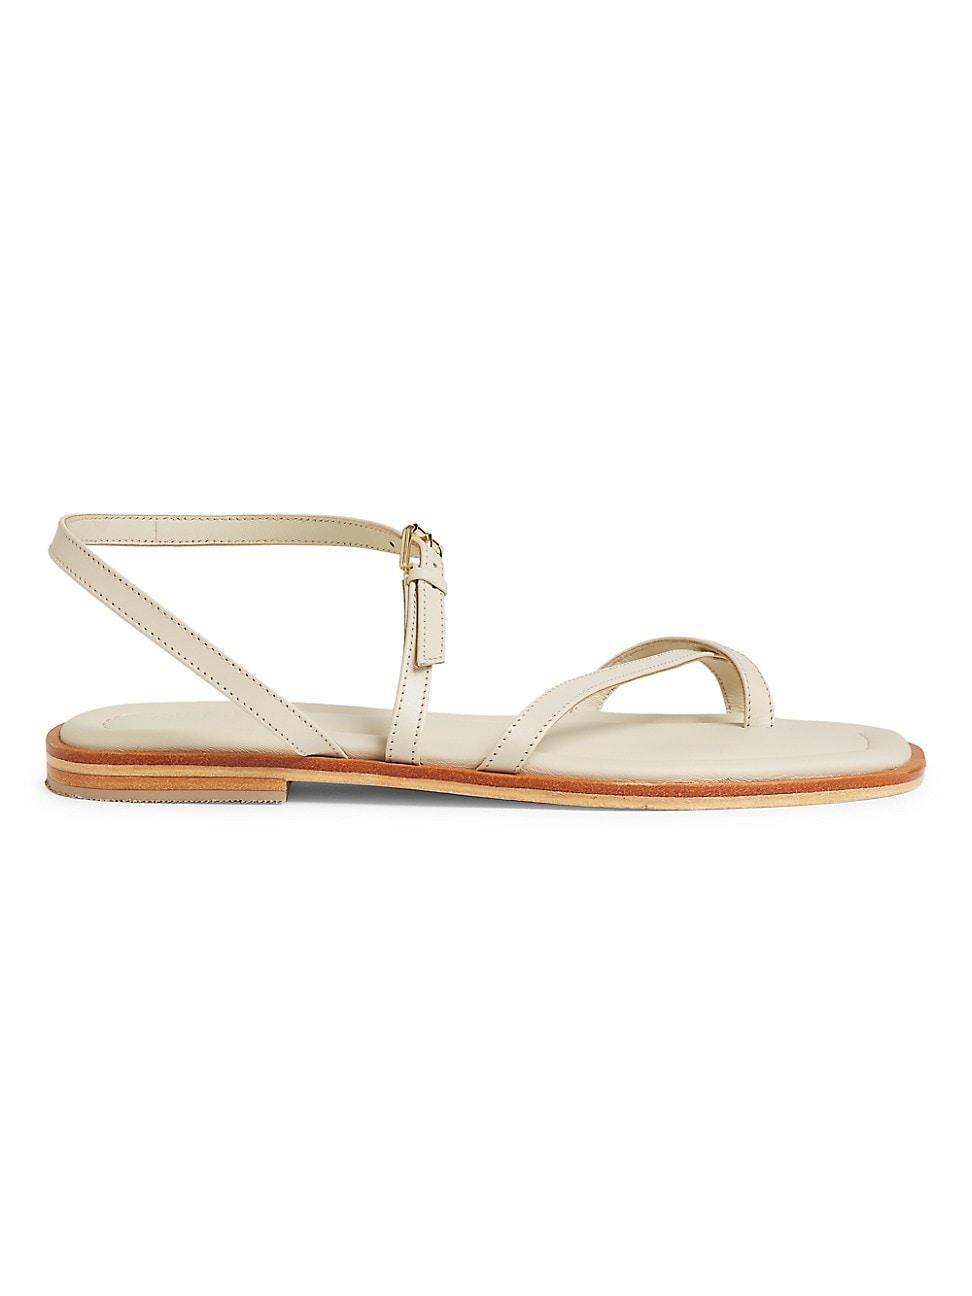 Womens Lucia Leather Sandals Product Image